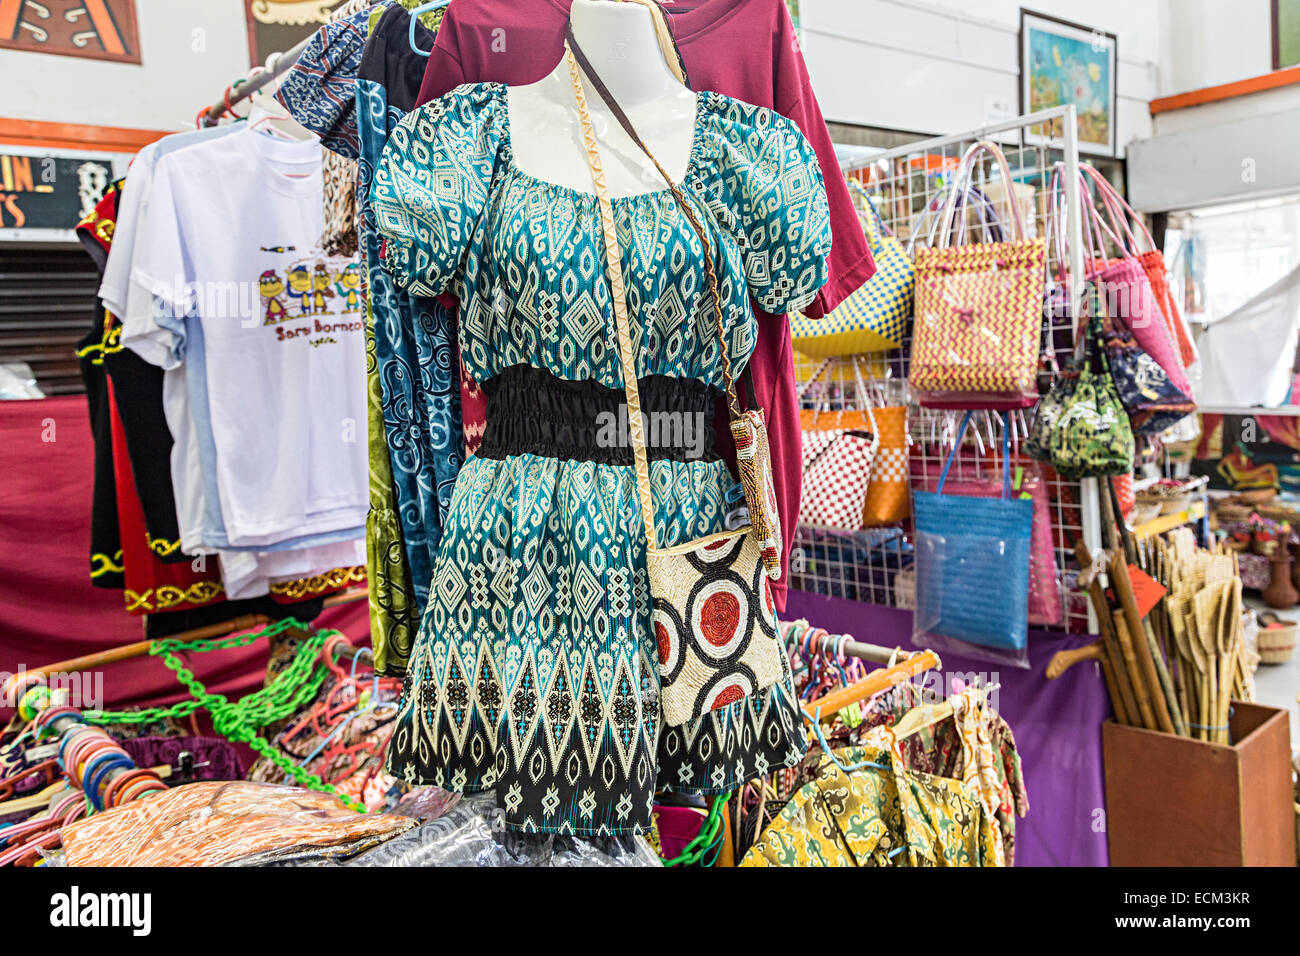 Clothes on sale in local indoor market shop, Miri, Malaysia Stock Photo